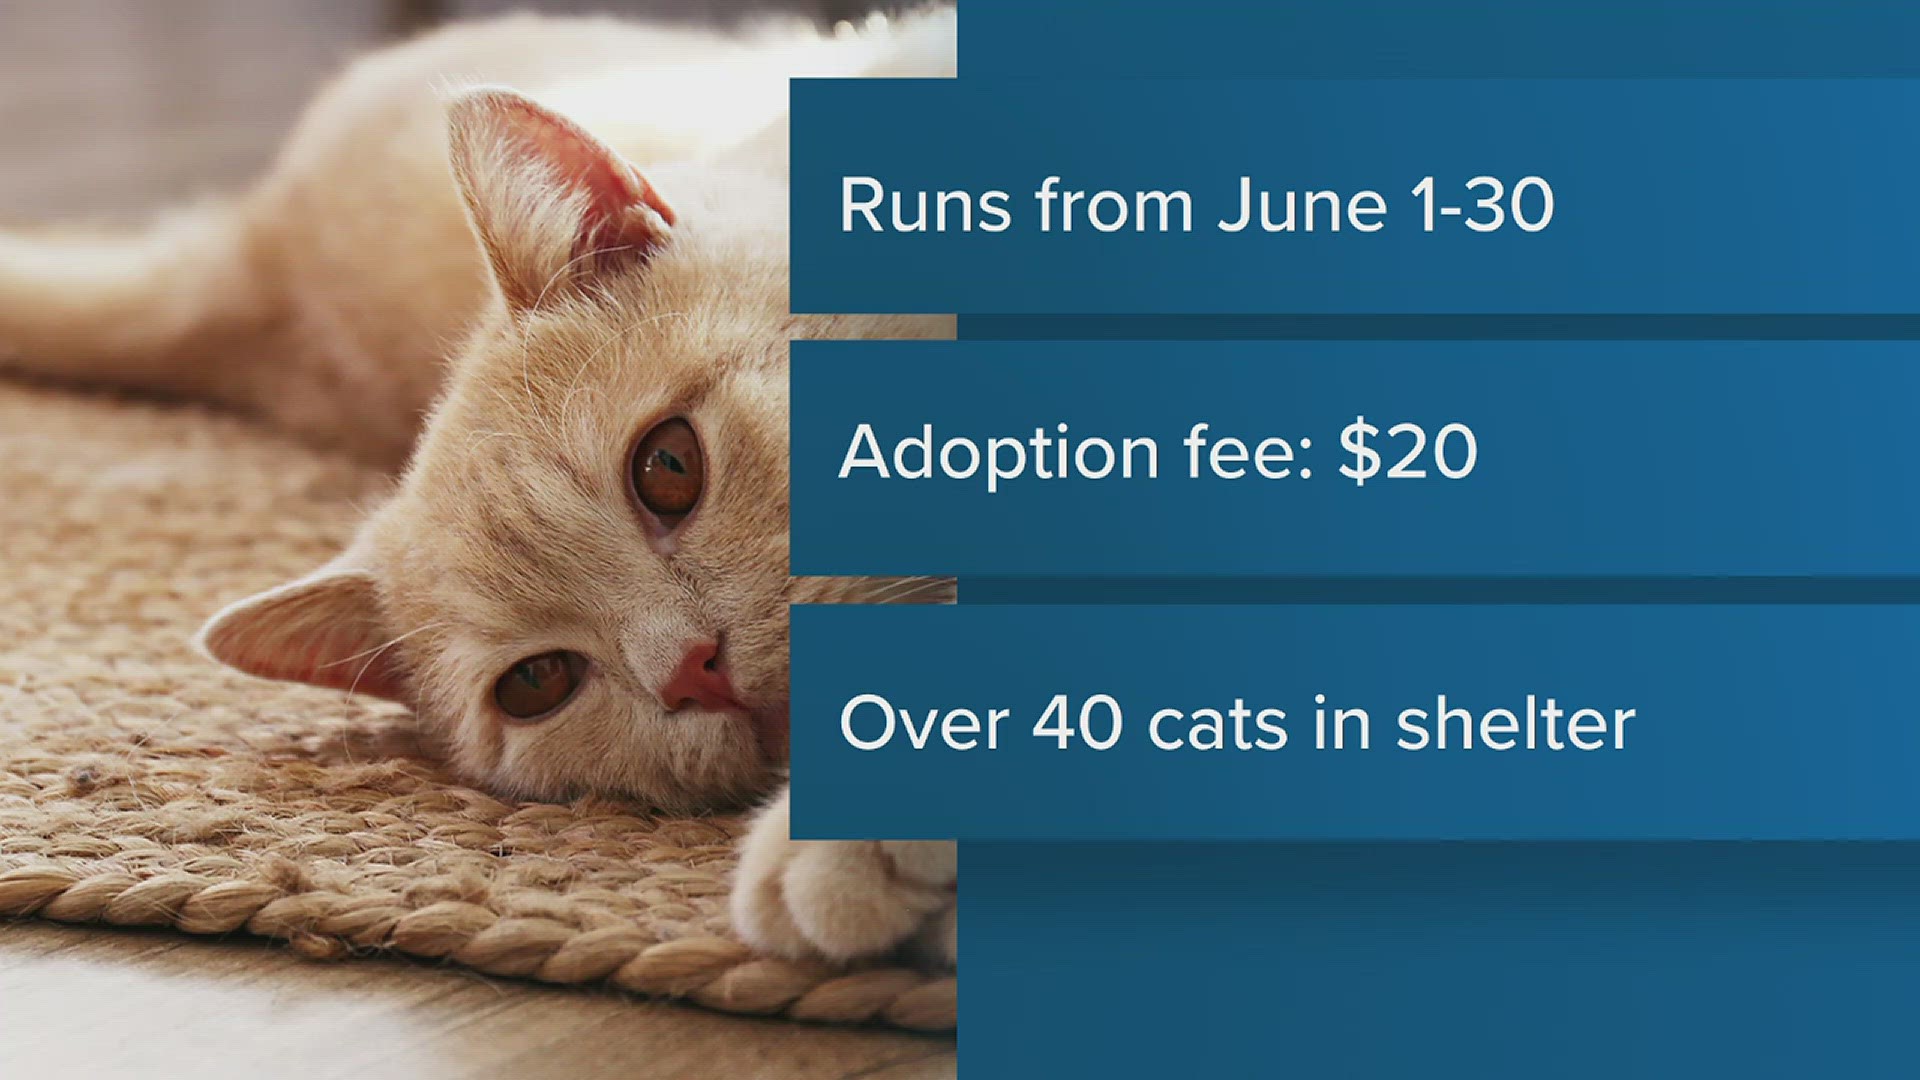 It will be $20 to adopt all calls and kittens. This will include animal's spay/neuter, microchip, first set of vaccines, flea prevention, and de-wormer.